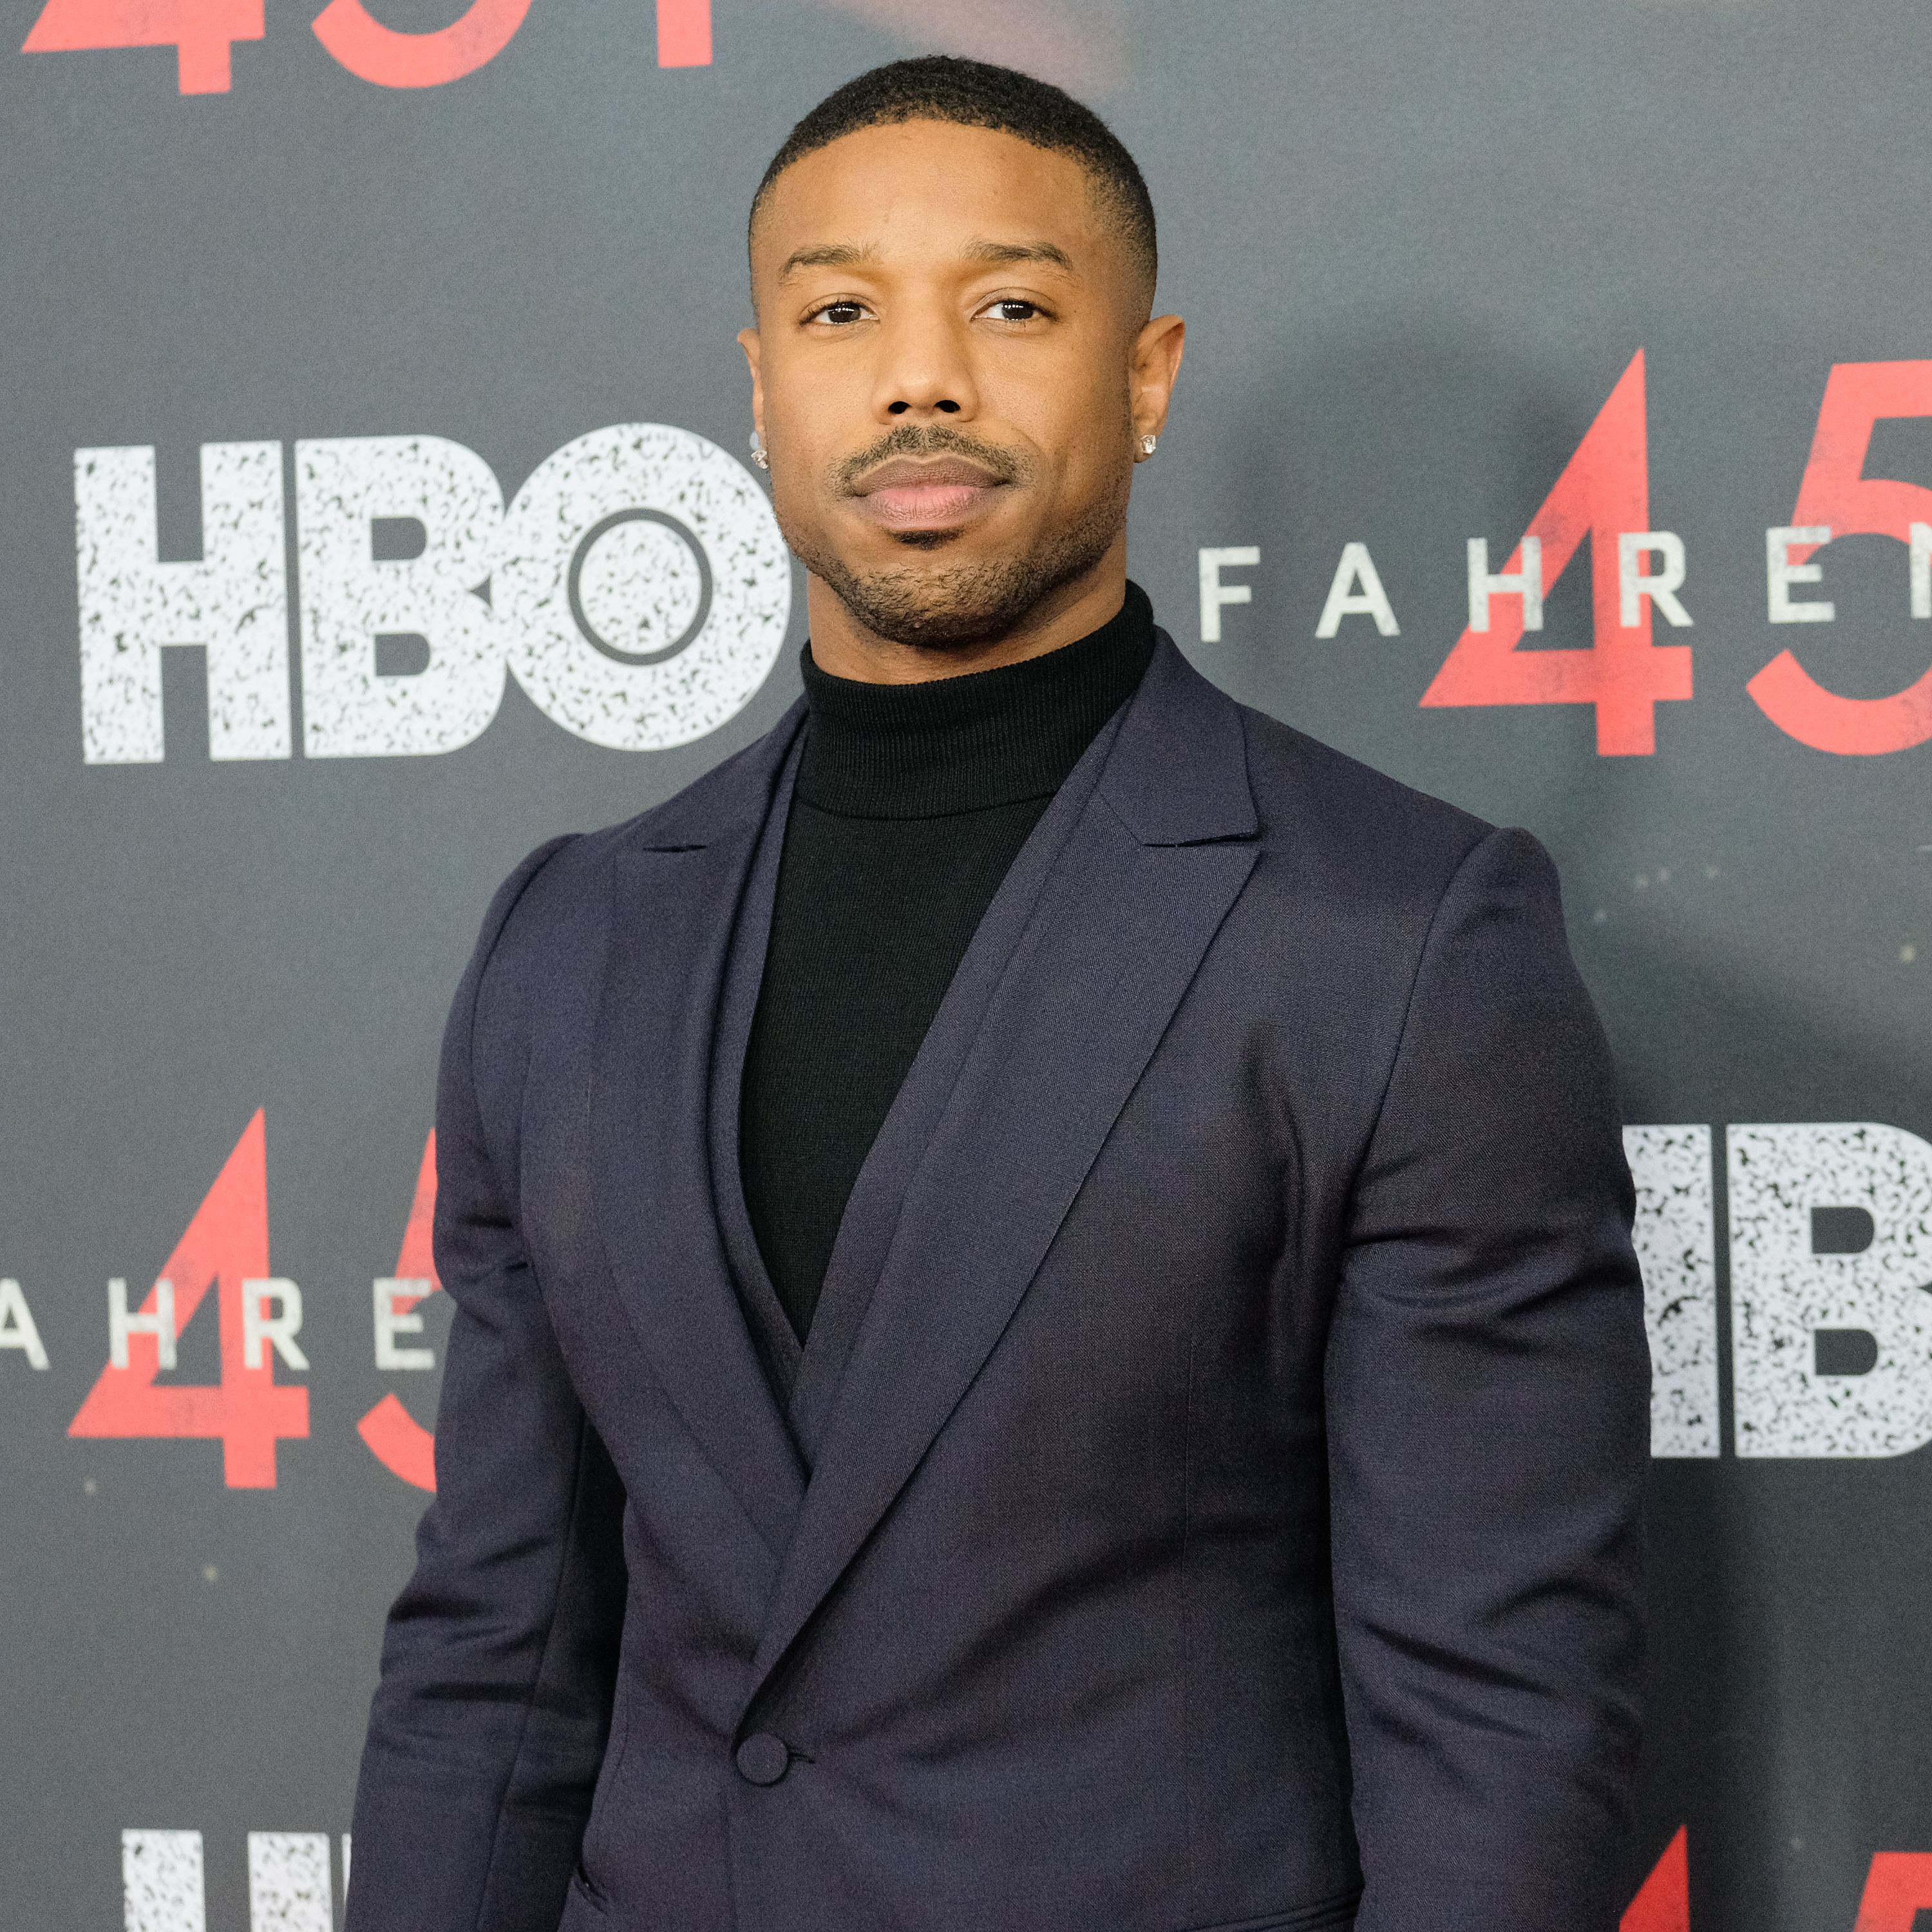 Michael B. Jordan attends the "Fahrenheit 451" premiere at NYU Skirball Center on May 8, 2018 in New York. | Photo: Getty Images